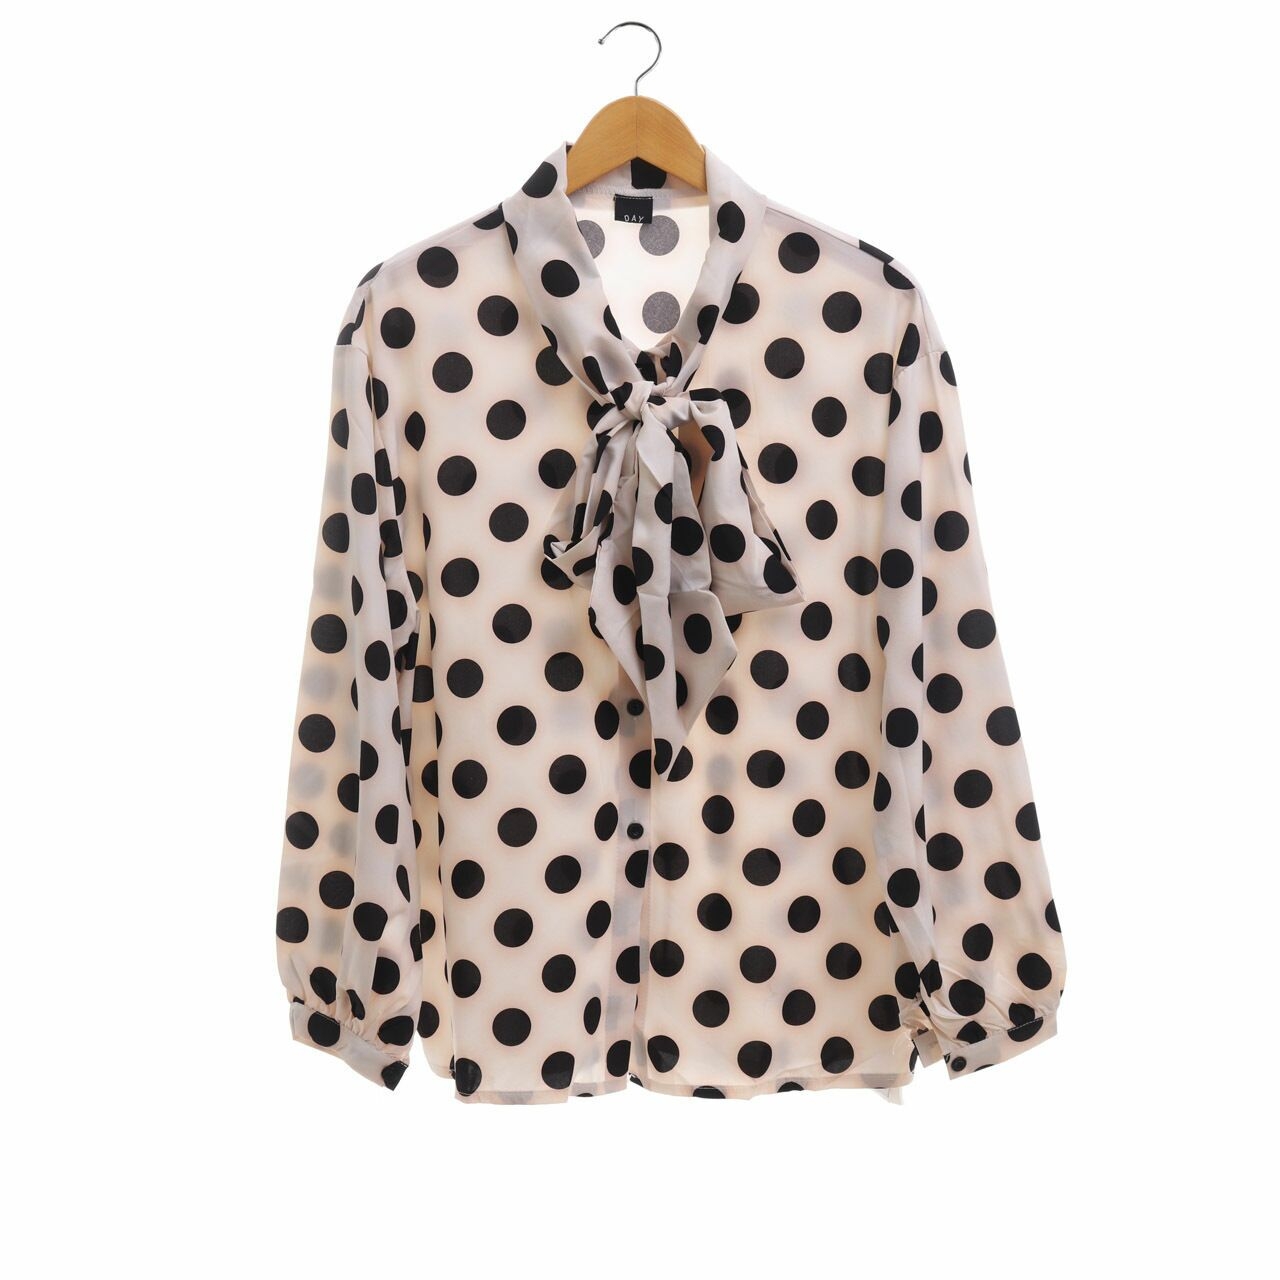 Day by Love And flair Nude Polkadot Shirt